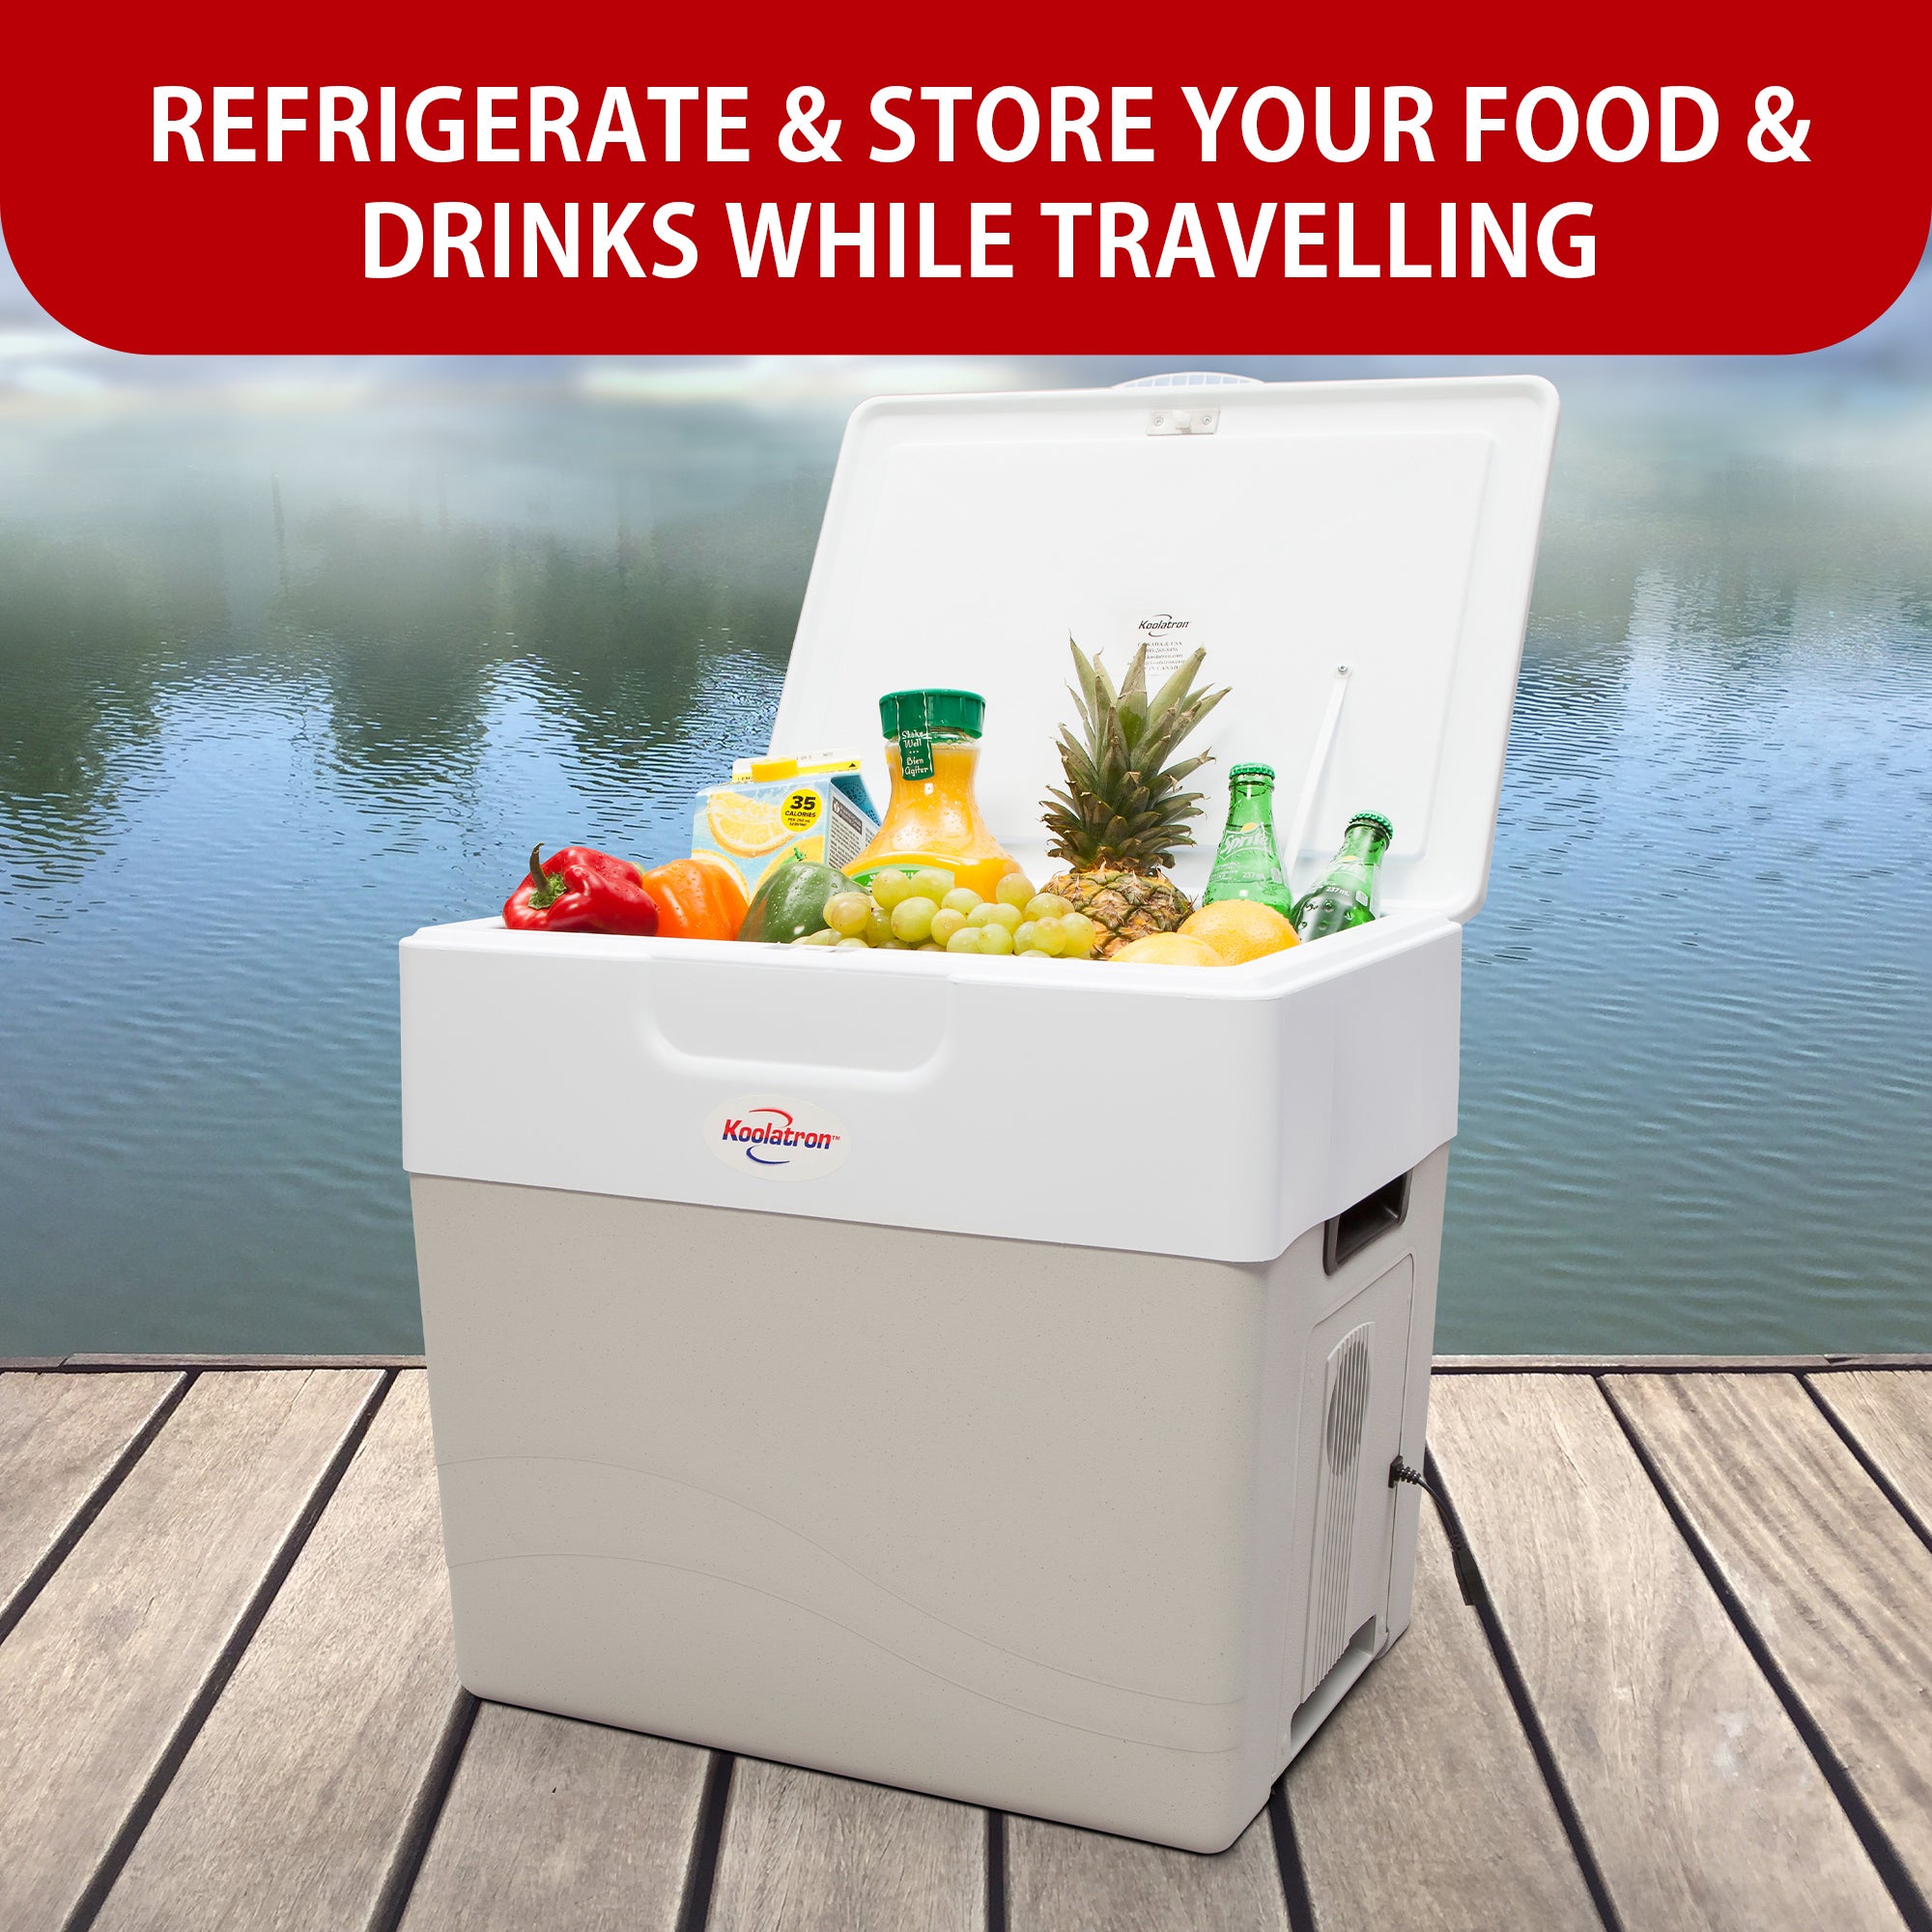 Koolatron portable 12V cooler/warmer open and filled with food and drinks on a dock with water and trees in the background. Text above reads, "REFRIGERATE AND STORE YOUR FOOD AND DRINKS WHILE TRAVELING"